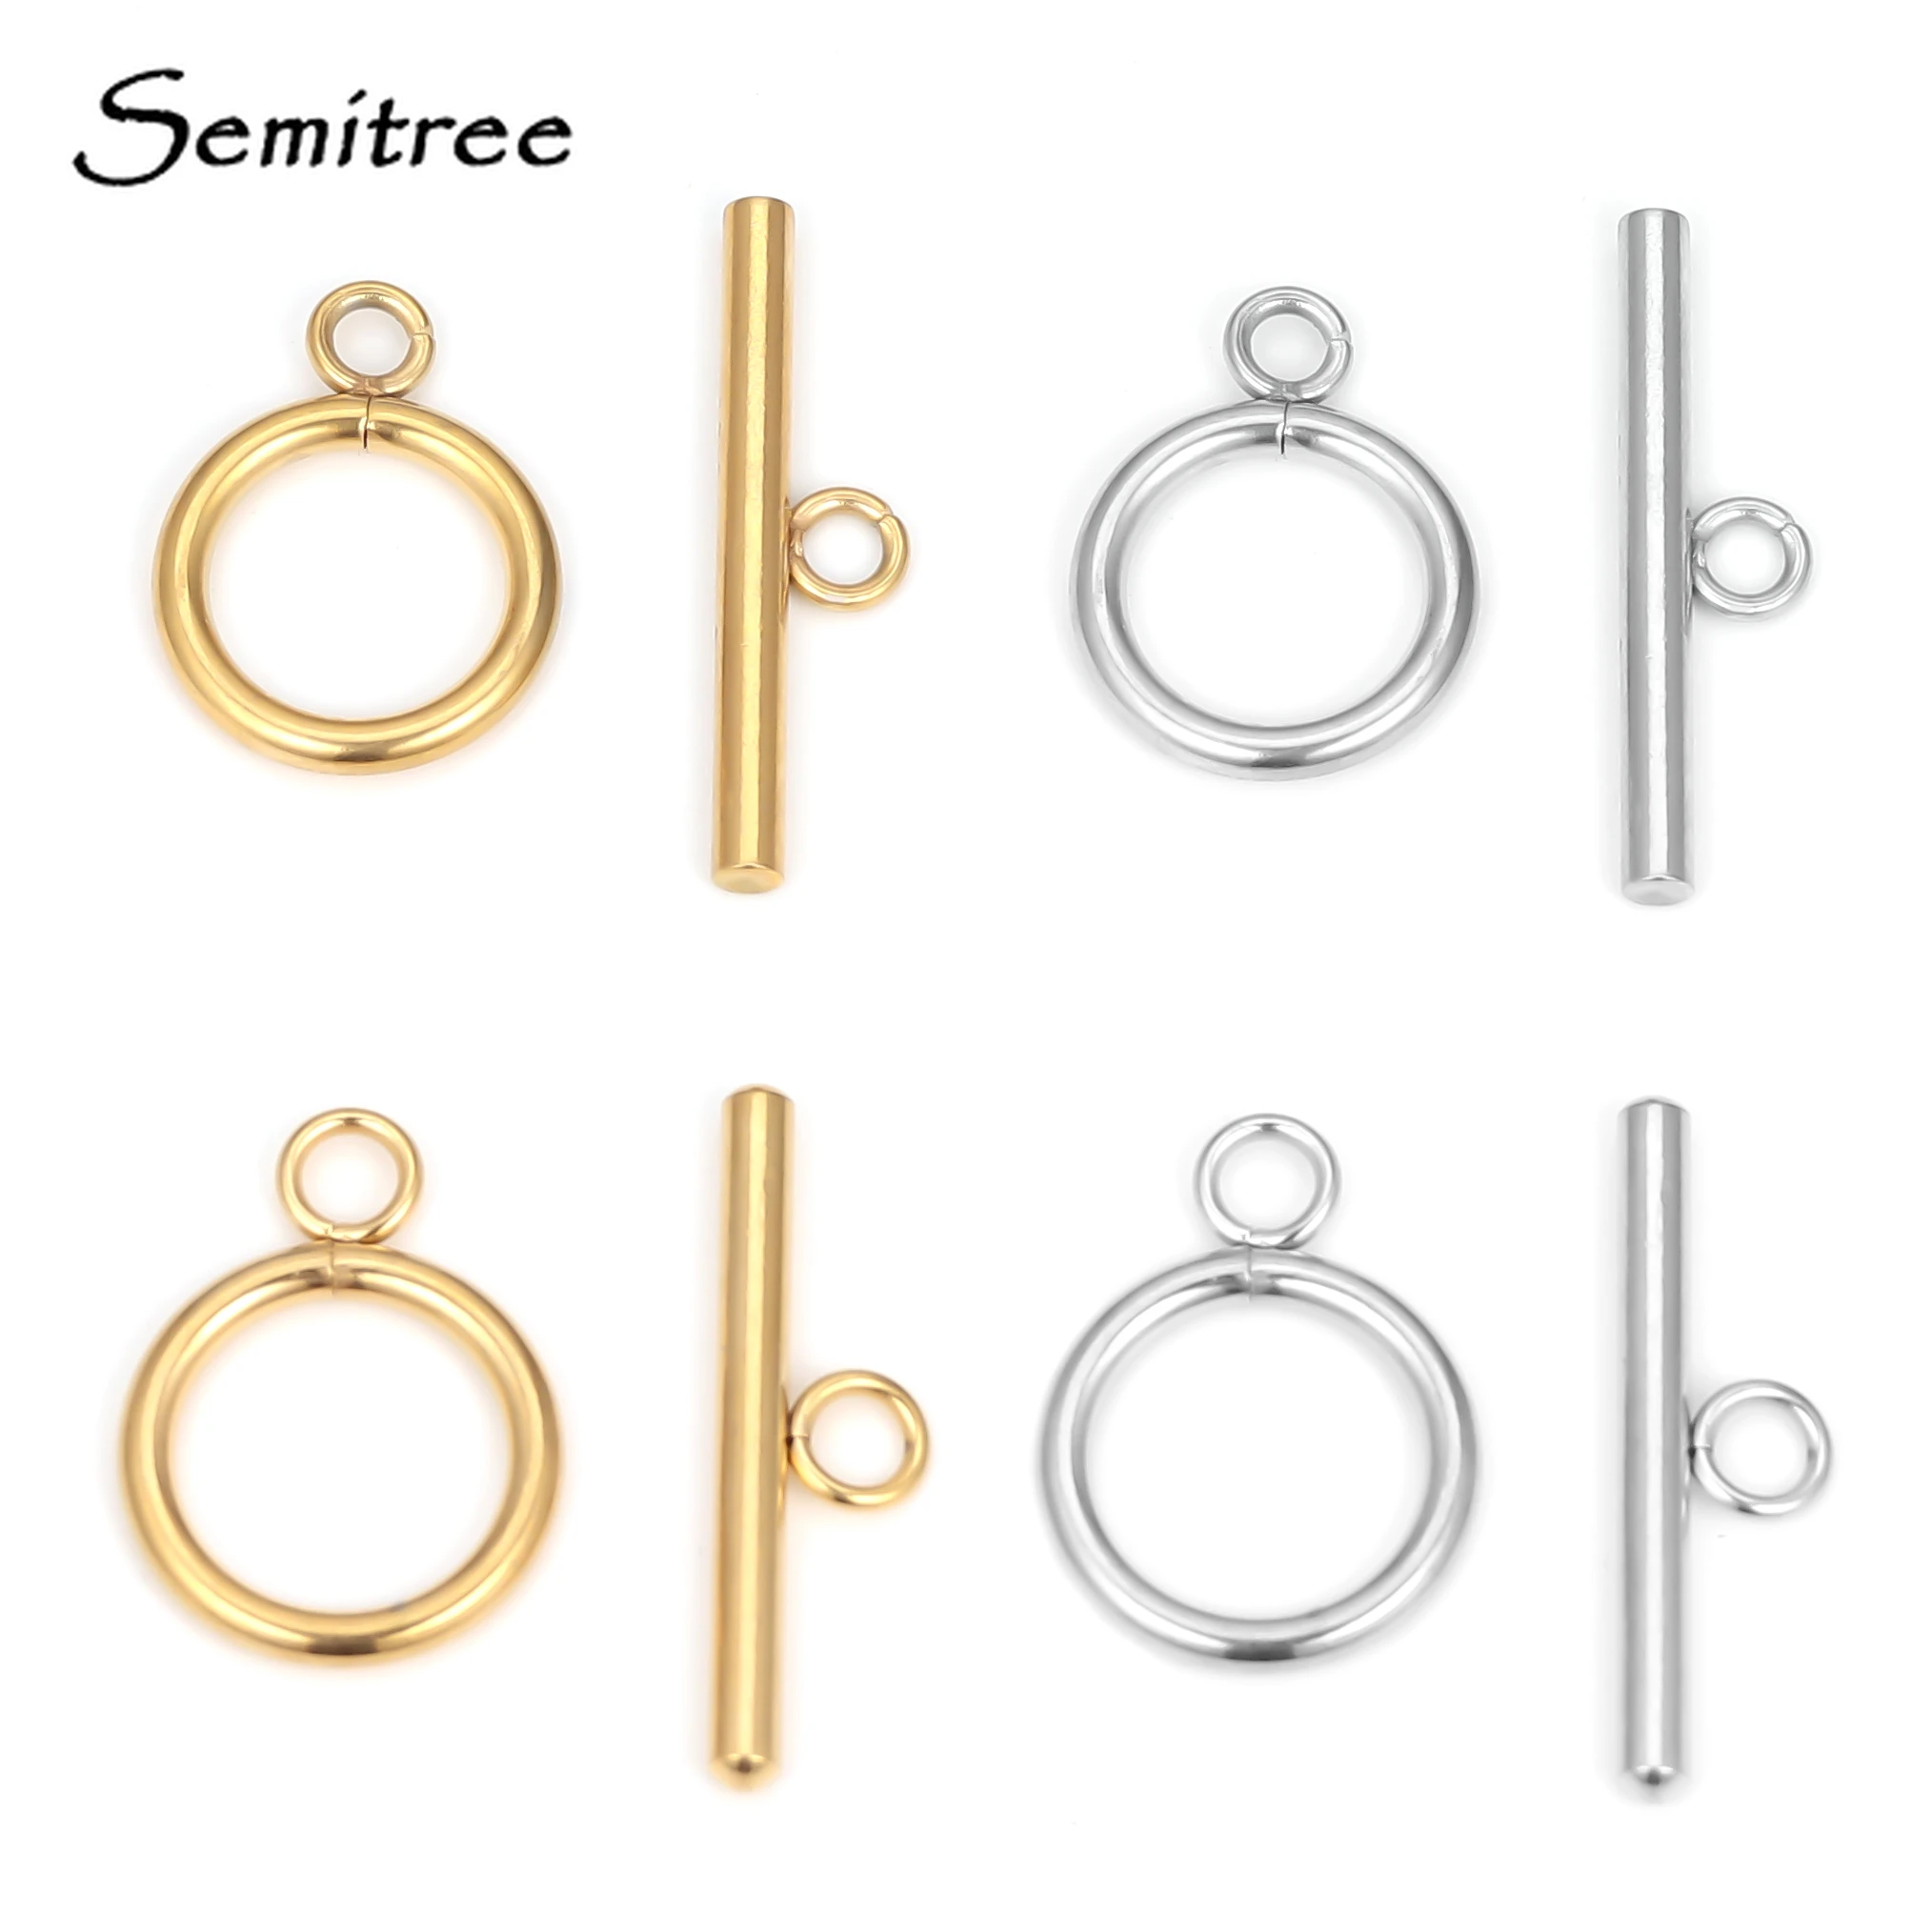 5 Sets Stainless Steel OT Clasp Toggle Clasps for DIY Jewelry Making Necklaces Connectors Bracelets Hooks Crafts Accessories